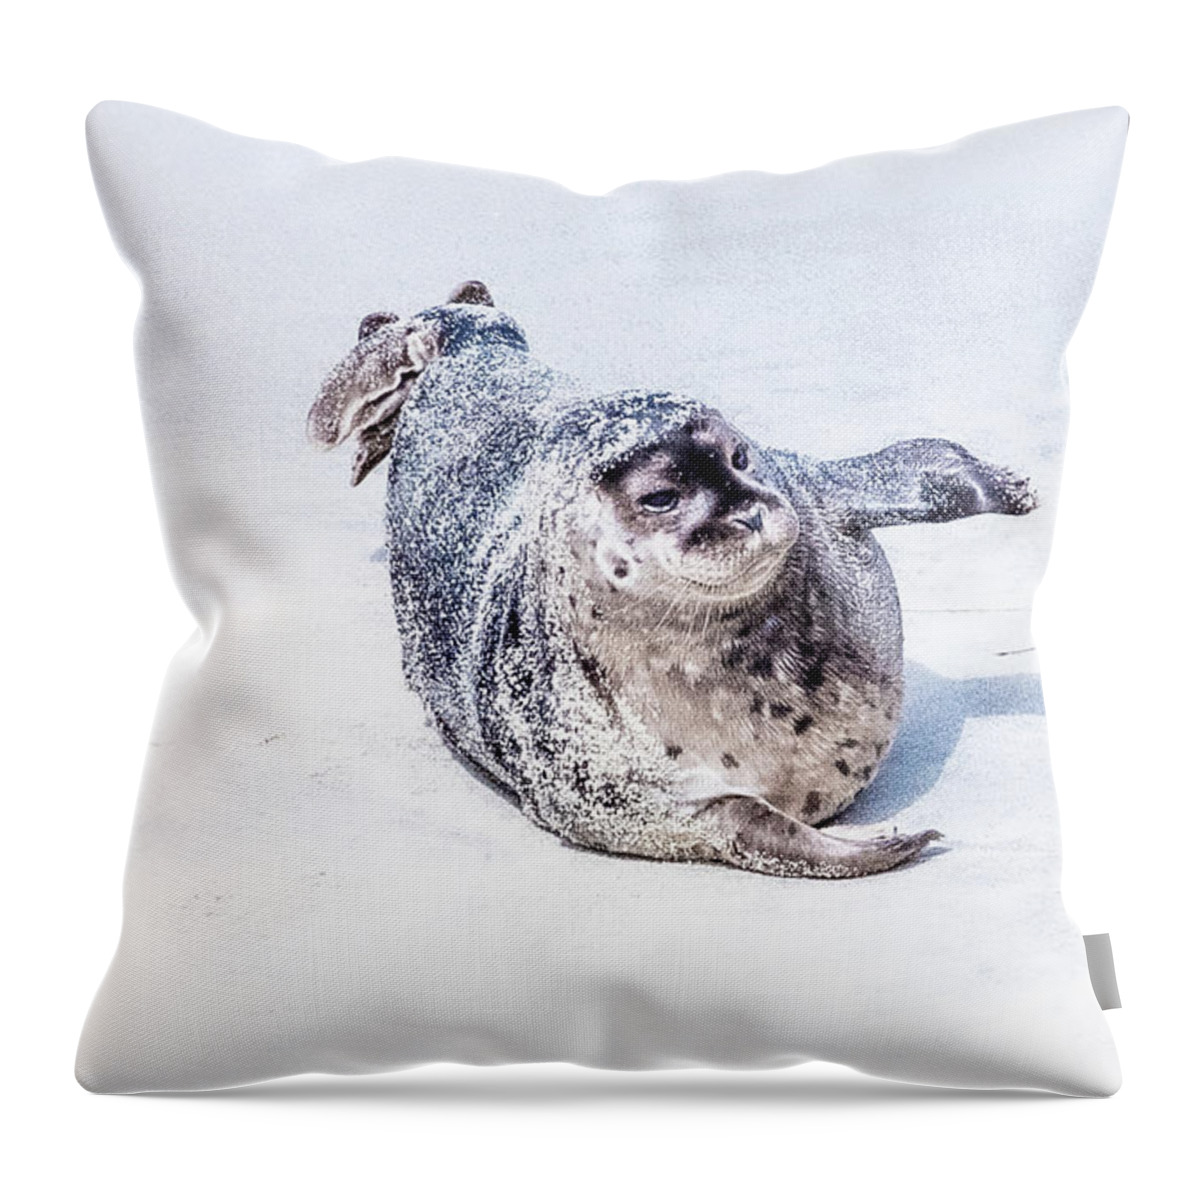 2019 Throw Pillow featuring the photograph Slip and Slide by Erin K Images